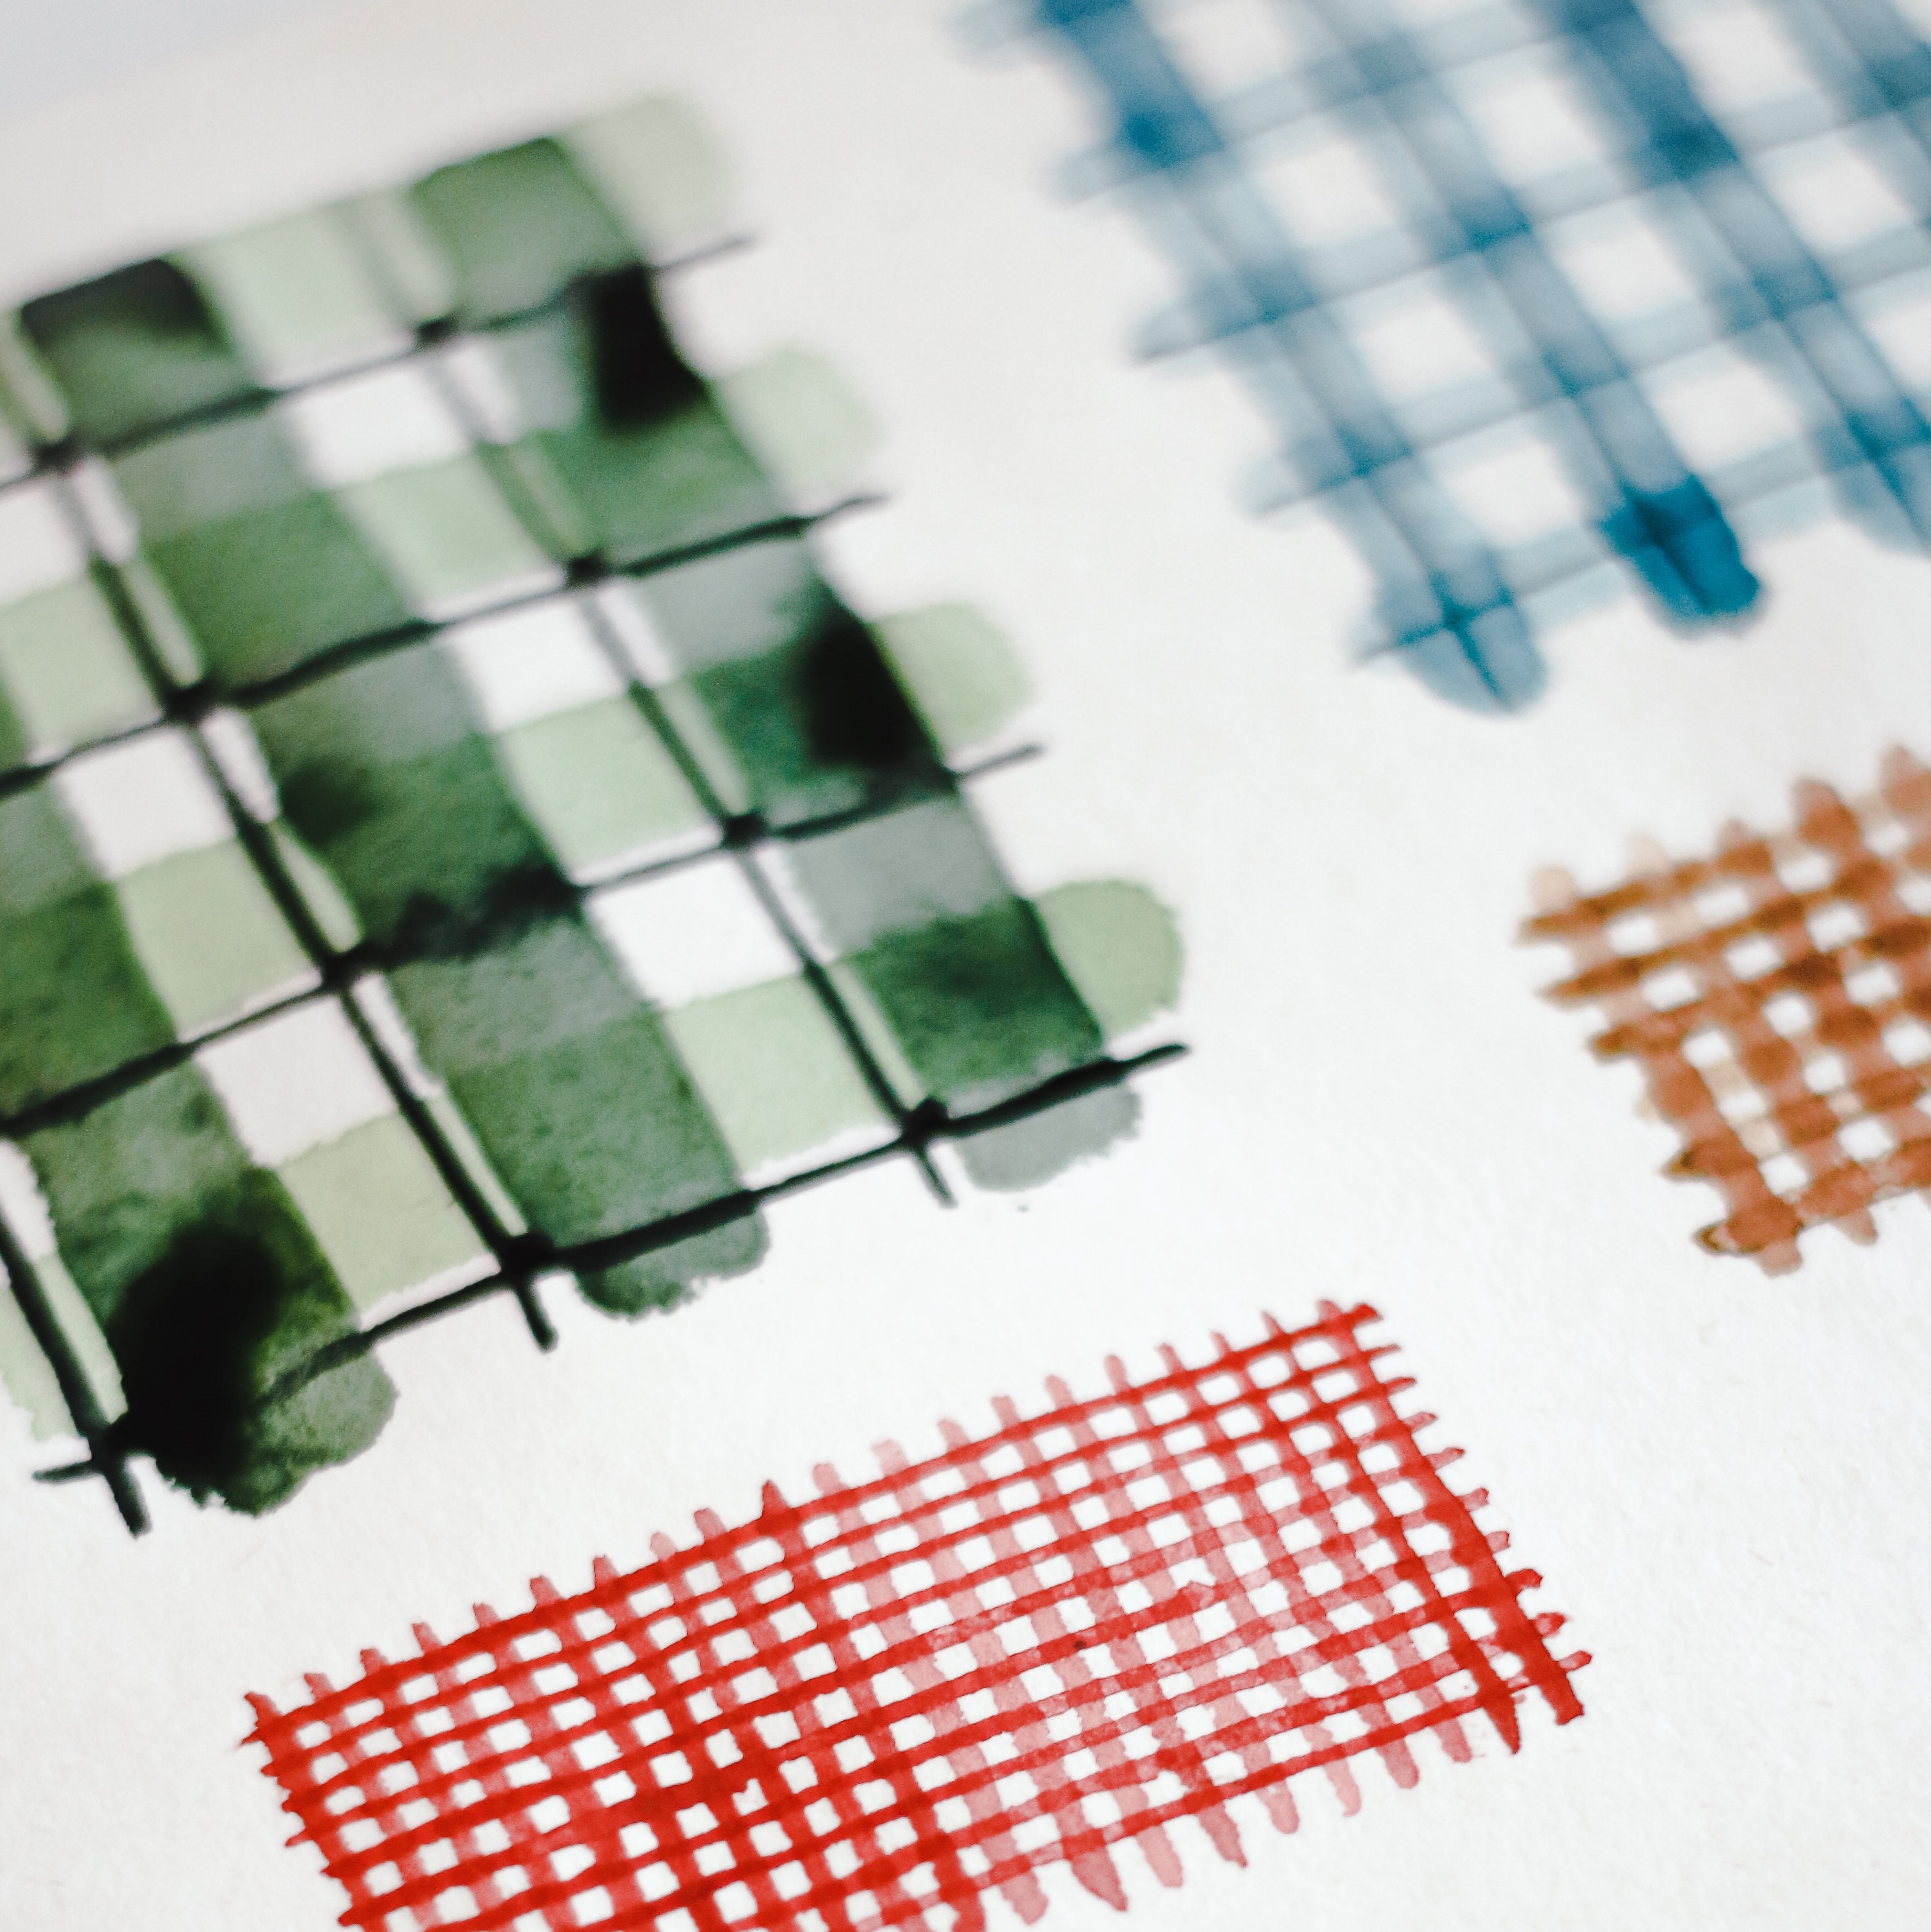 Square patterned drawings